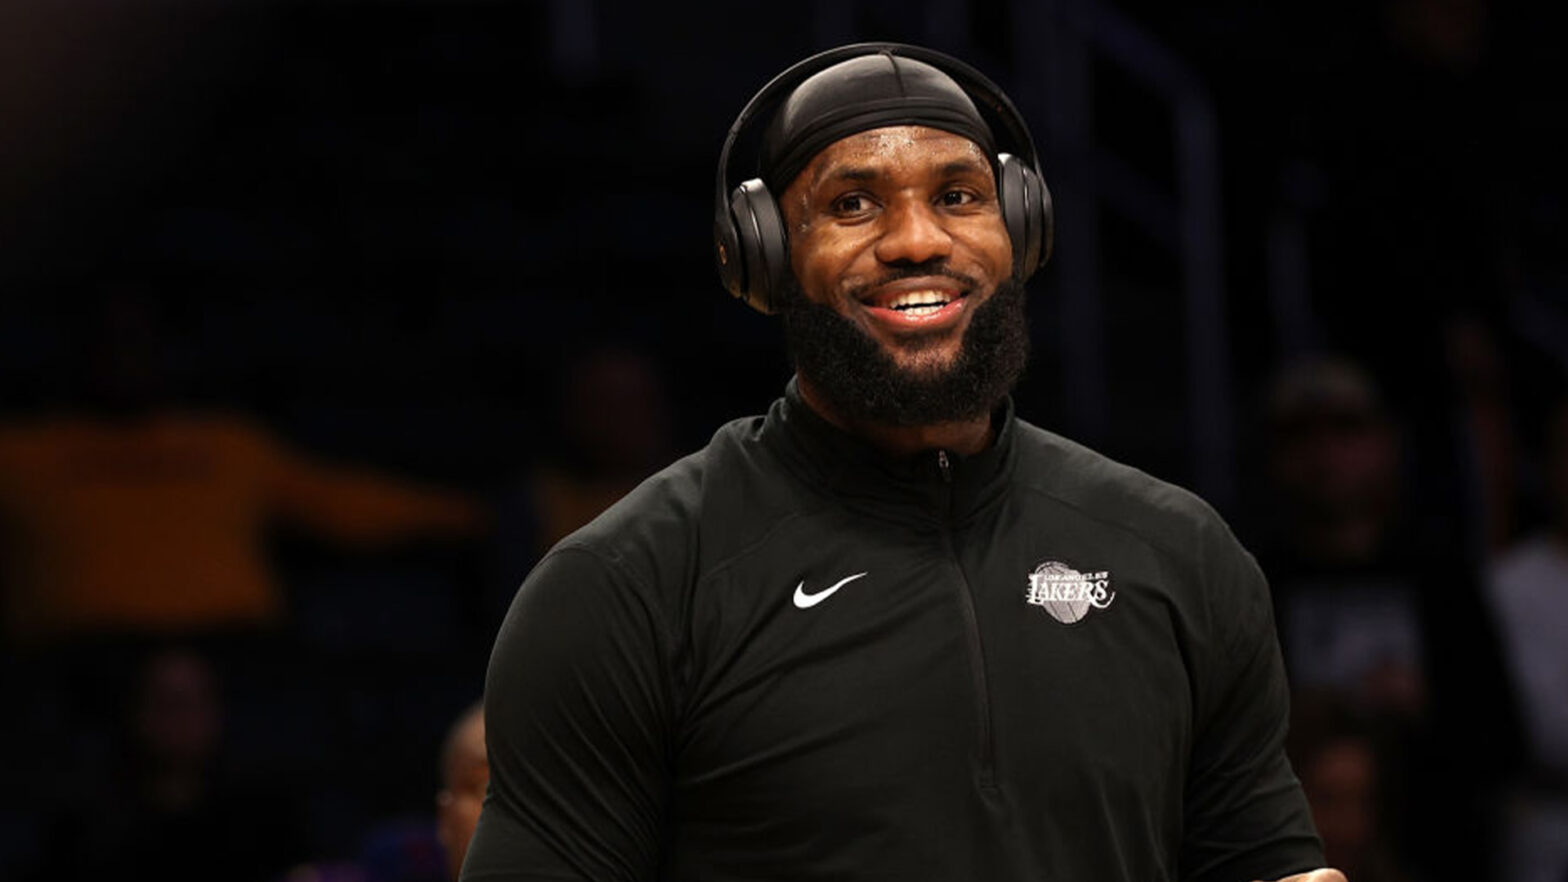 LeBron James' Foundation To Open A Job Facility For His I Promise School's Students And Families